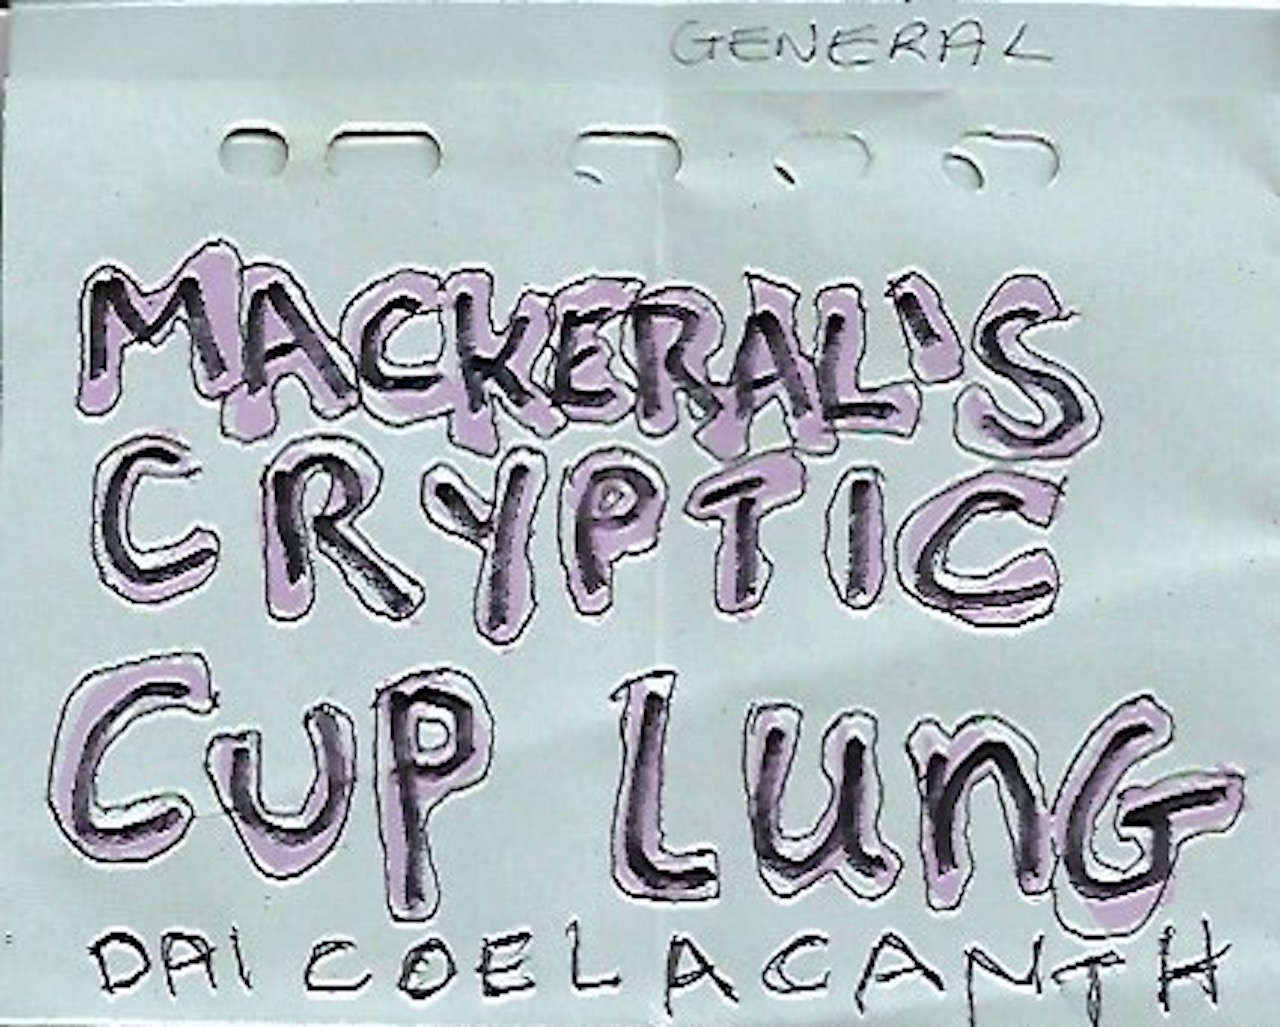 Dai Coelacanth – Mackeral’s cryptic cup lung